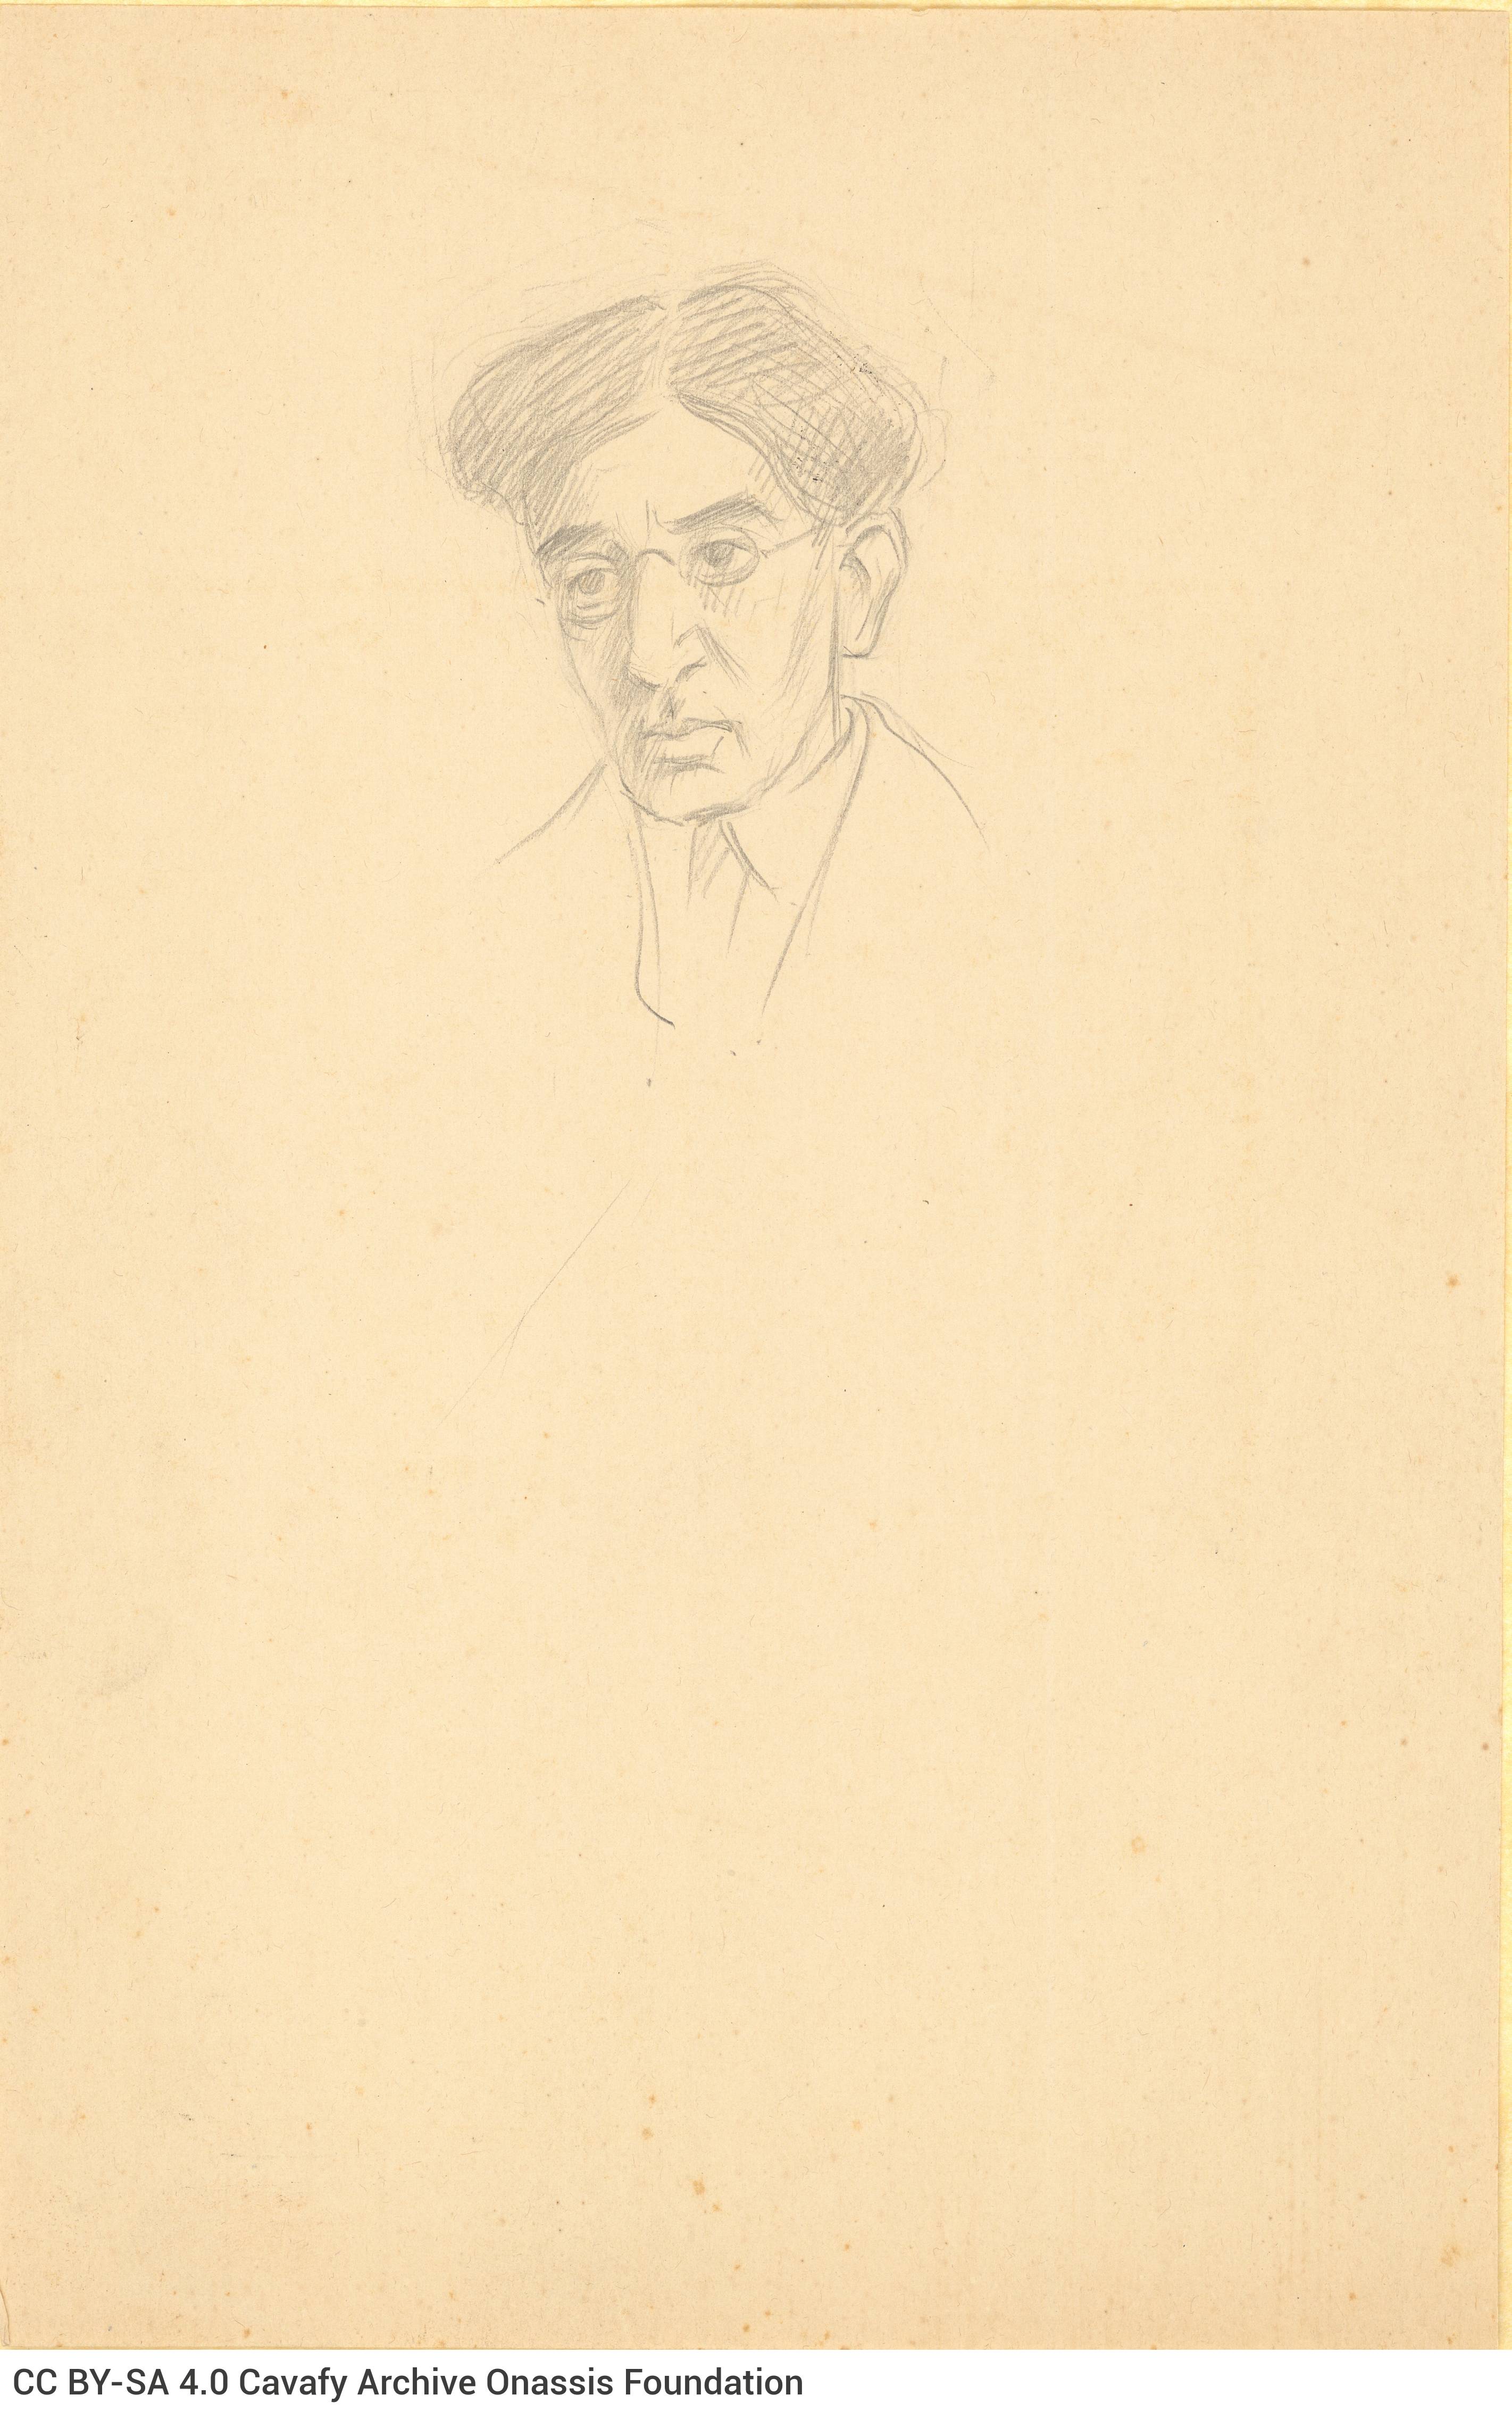 Sketch by an unknown person on one side of a sheet. Blank verso. It depicts Cavafy wearing glasses and looking to the left.